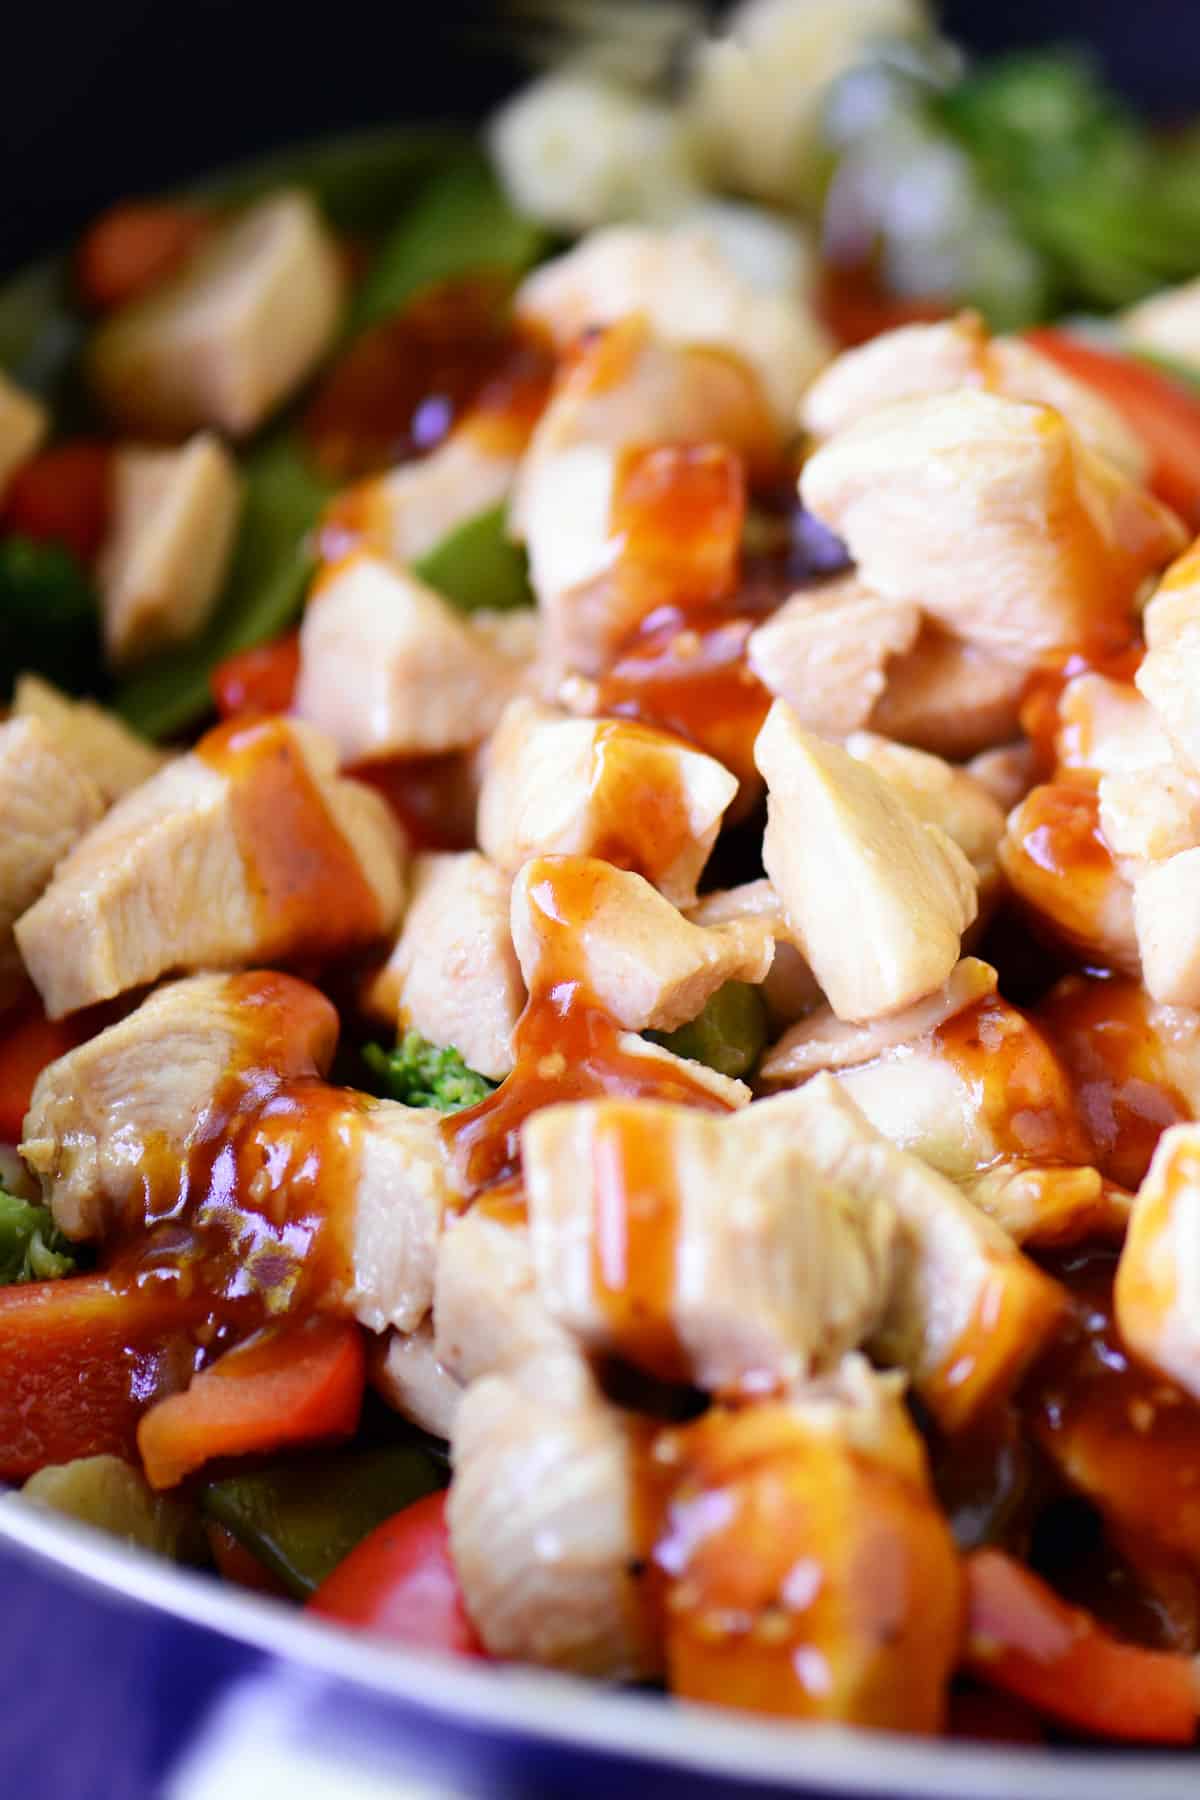 Stir fry sauce drizzled on chicken and veggies.